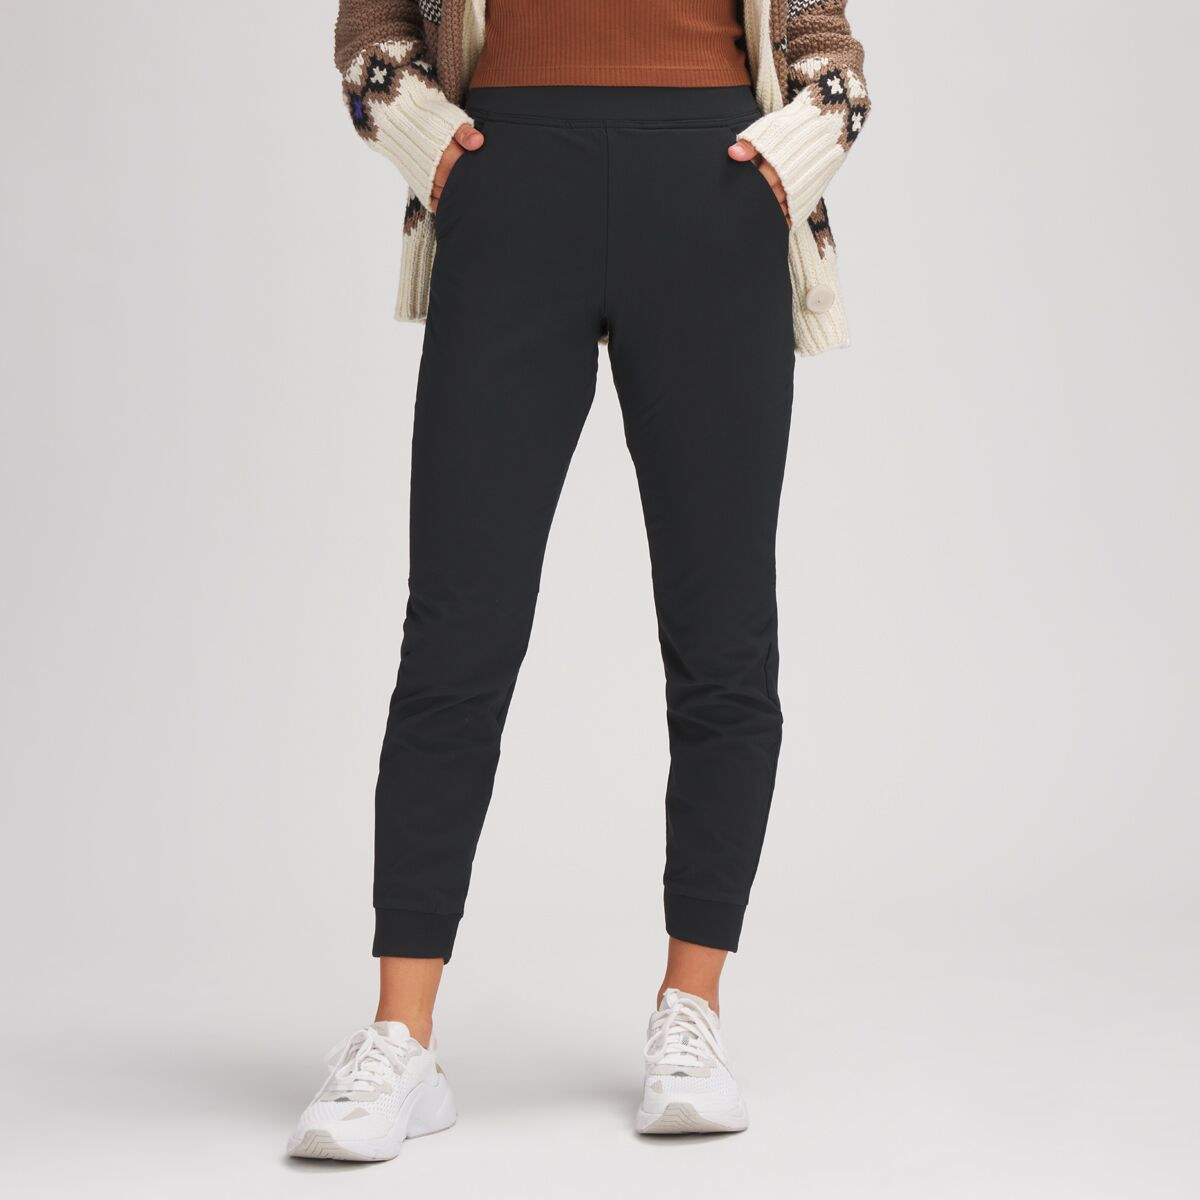 Backcountry Fleece Lined On The Go Pant - Women's